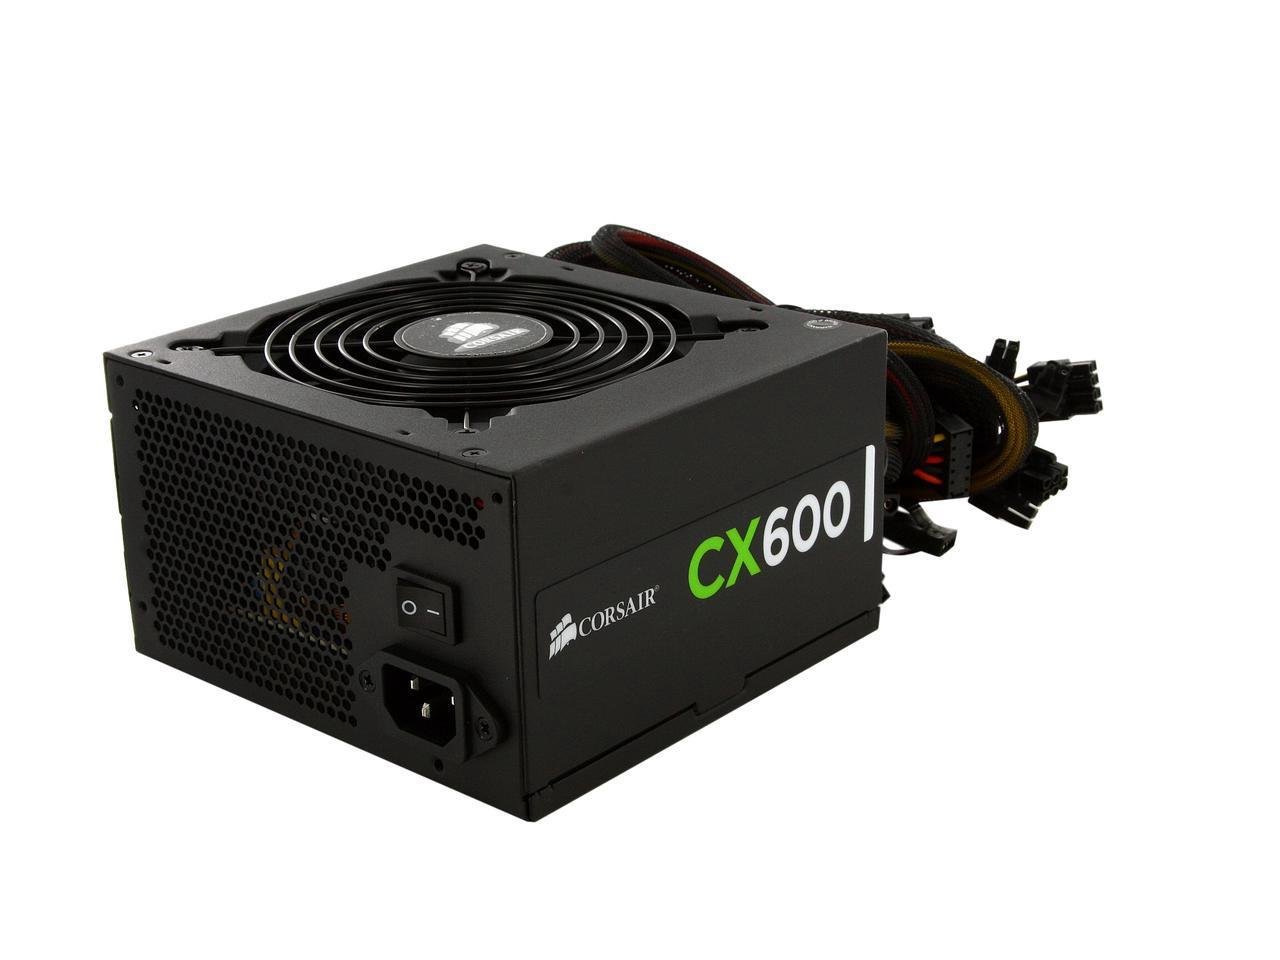 SOLD] Corsair CX600 600W 80 PLUS BRONZE Power Supply $40 OBO - Buy, Sell, Trade -